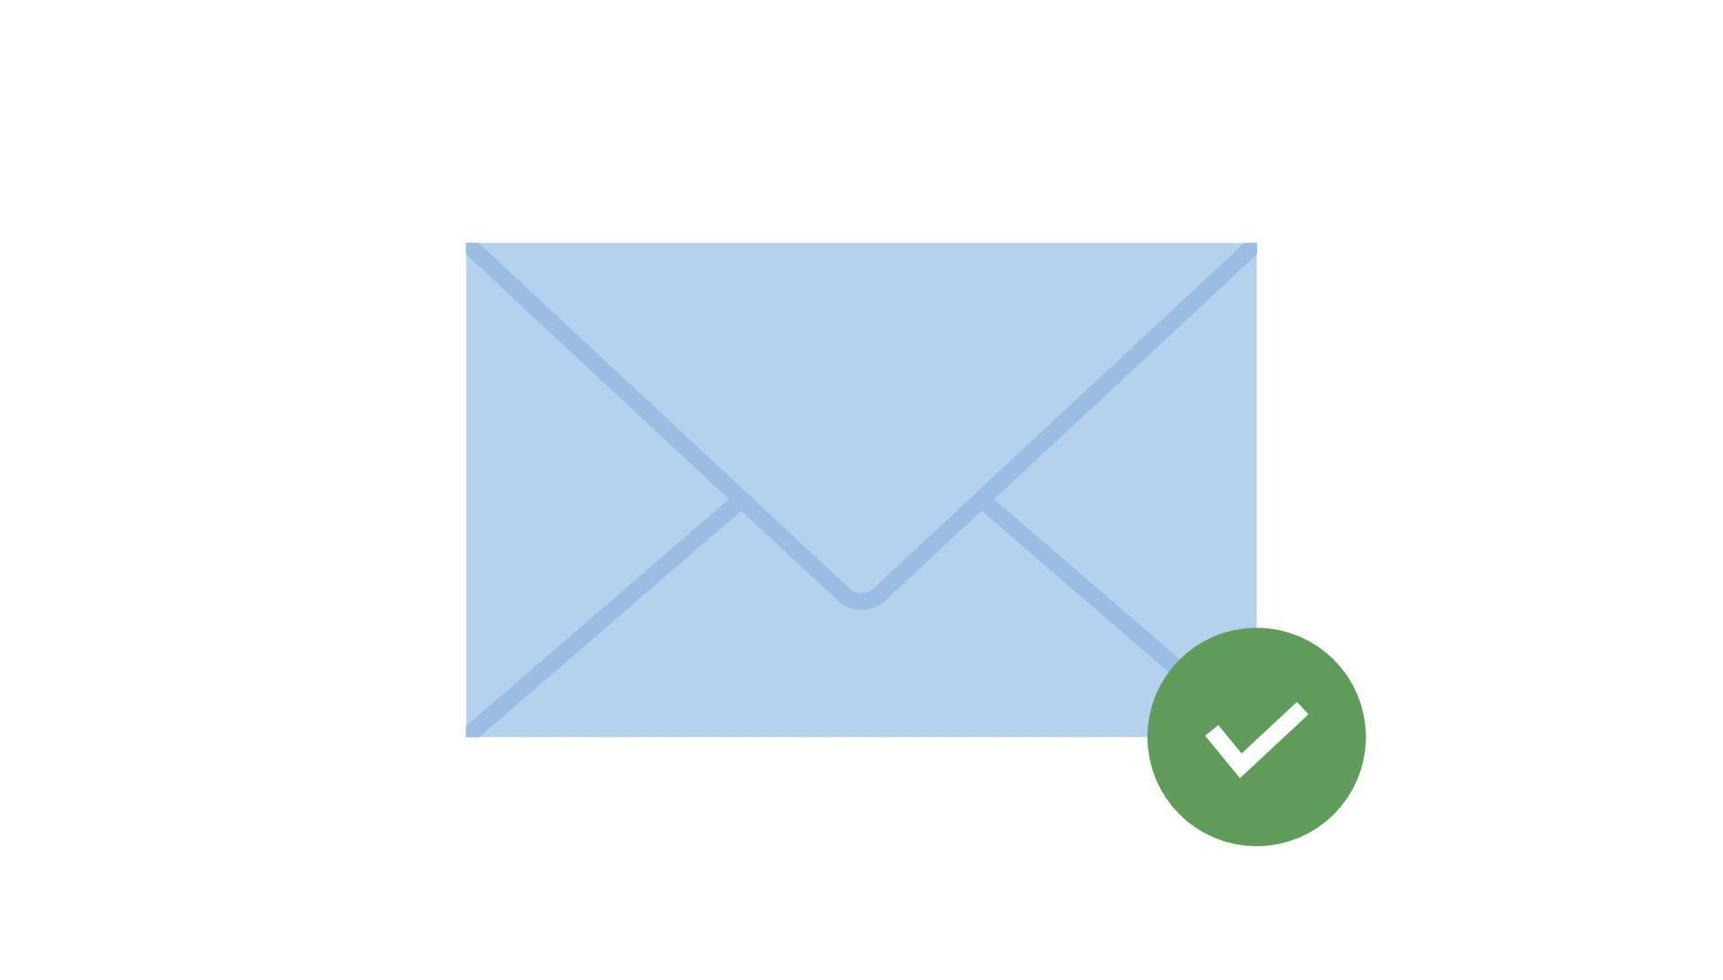 Confirmation sign on email symbol and email reading check simple concept flat vector illustration.